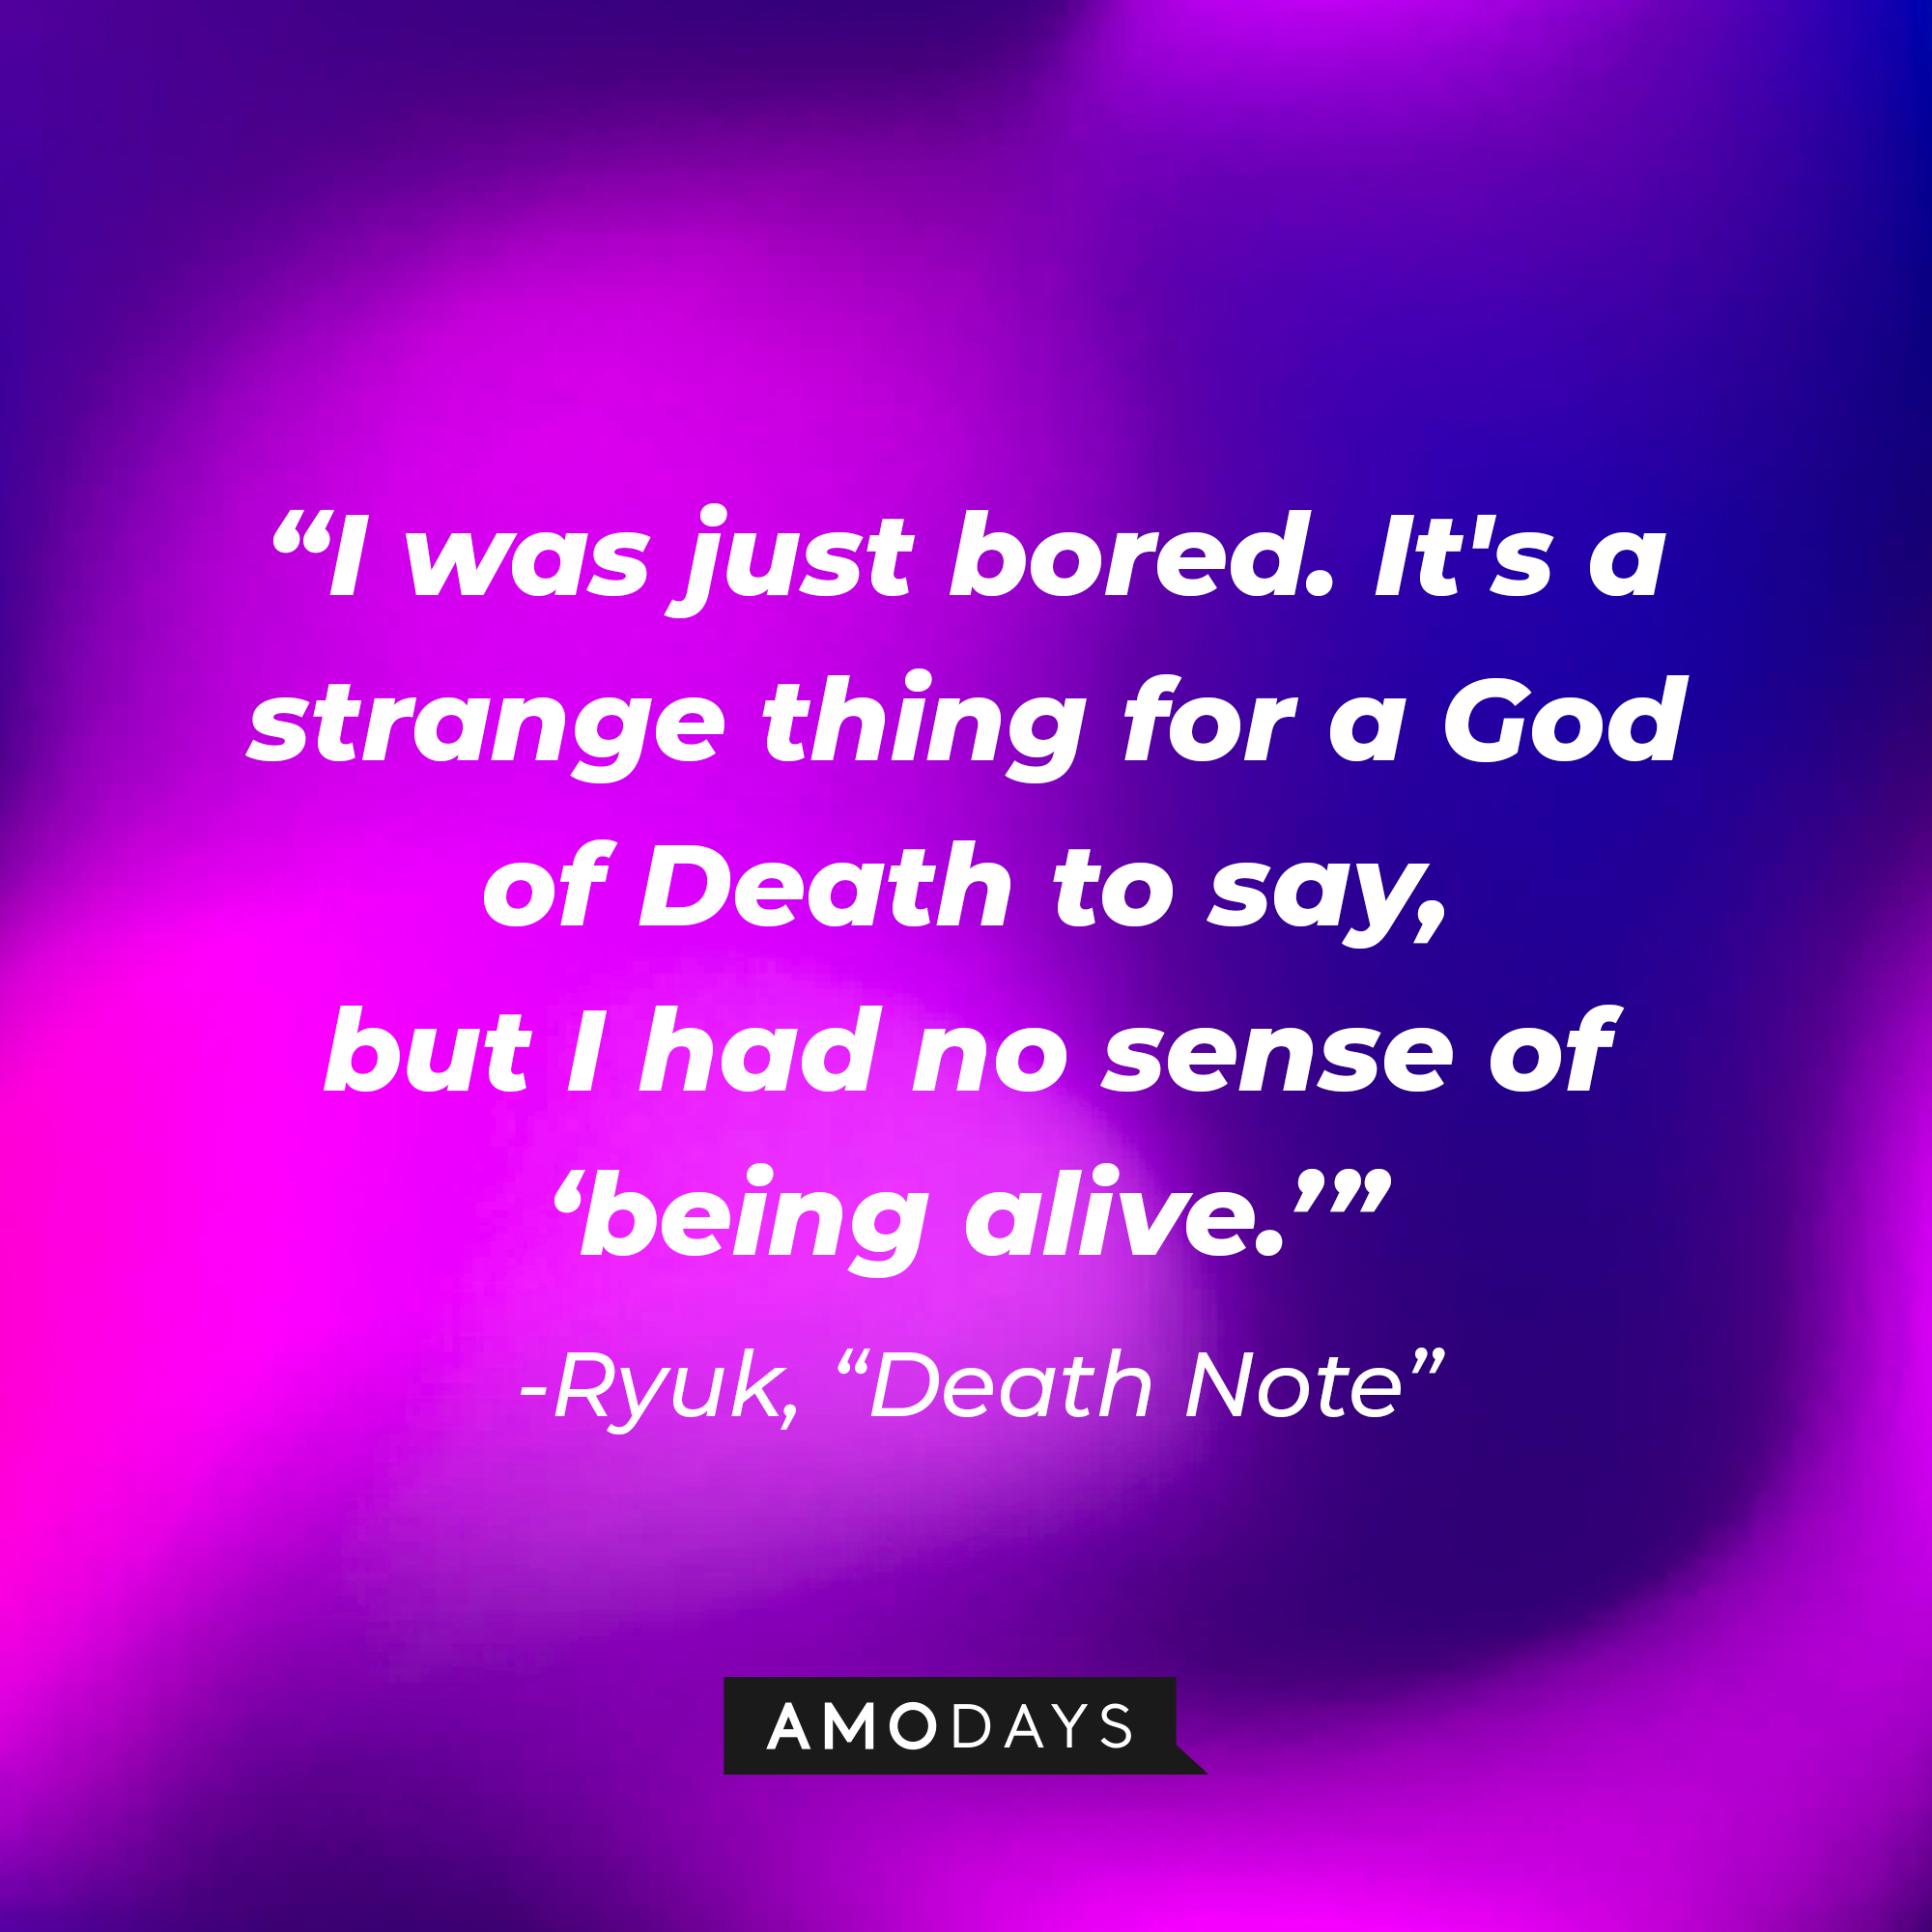 Ryuk's quote from "Death Note:" "I was just bored. It's a strange thing for a God of Death to say, but I had no sense of 'being alive.'" | Source: AmoDays